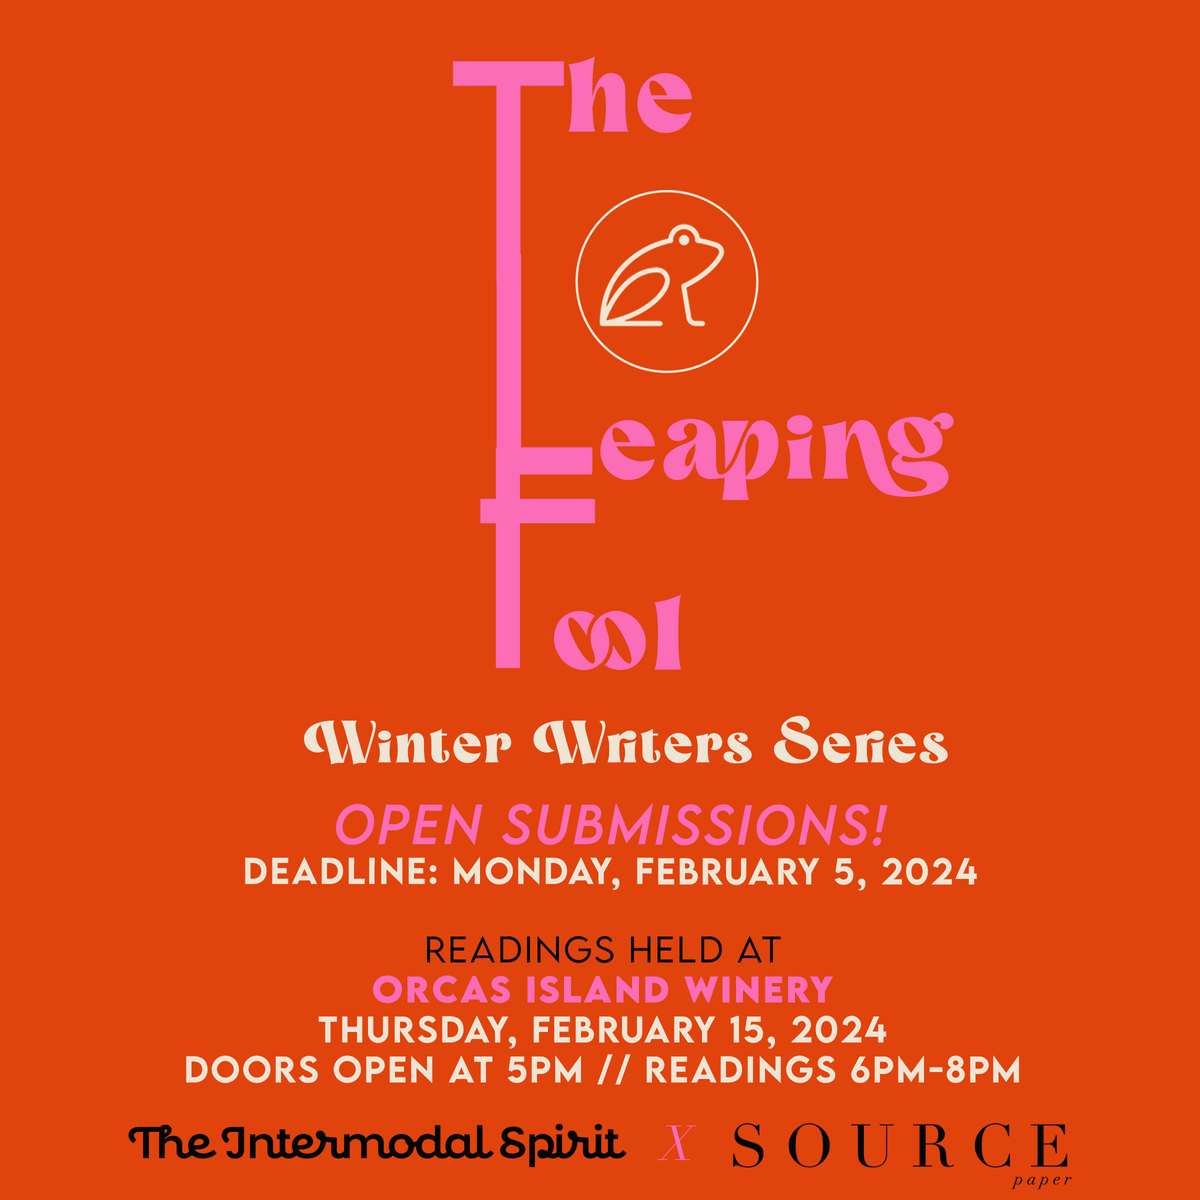 Submissions are open for the final Leaping Fool Winter Writers Series event of the season